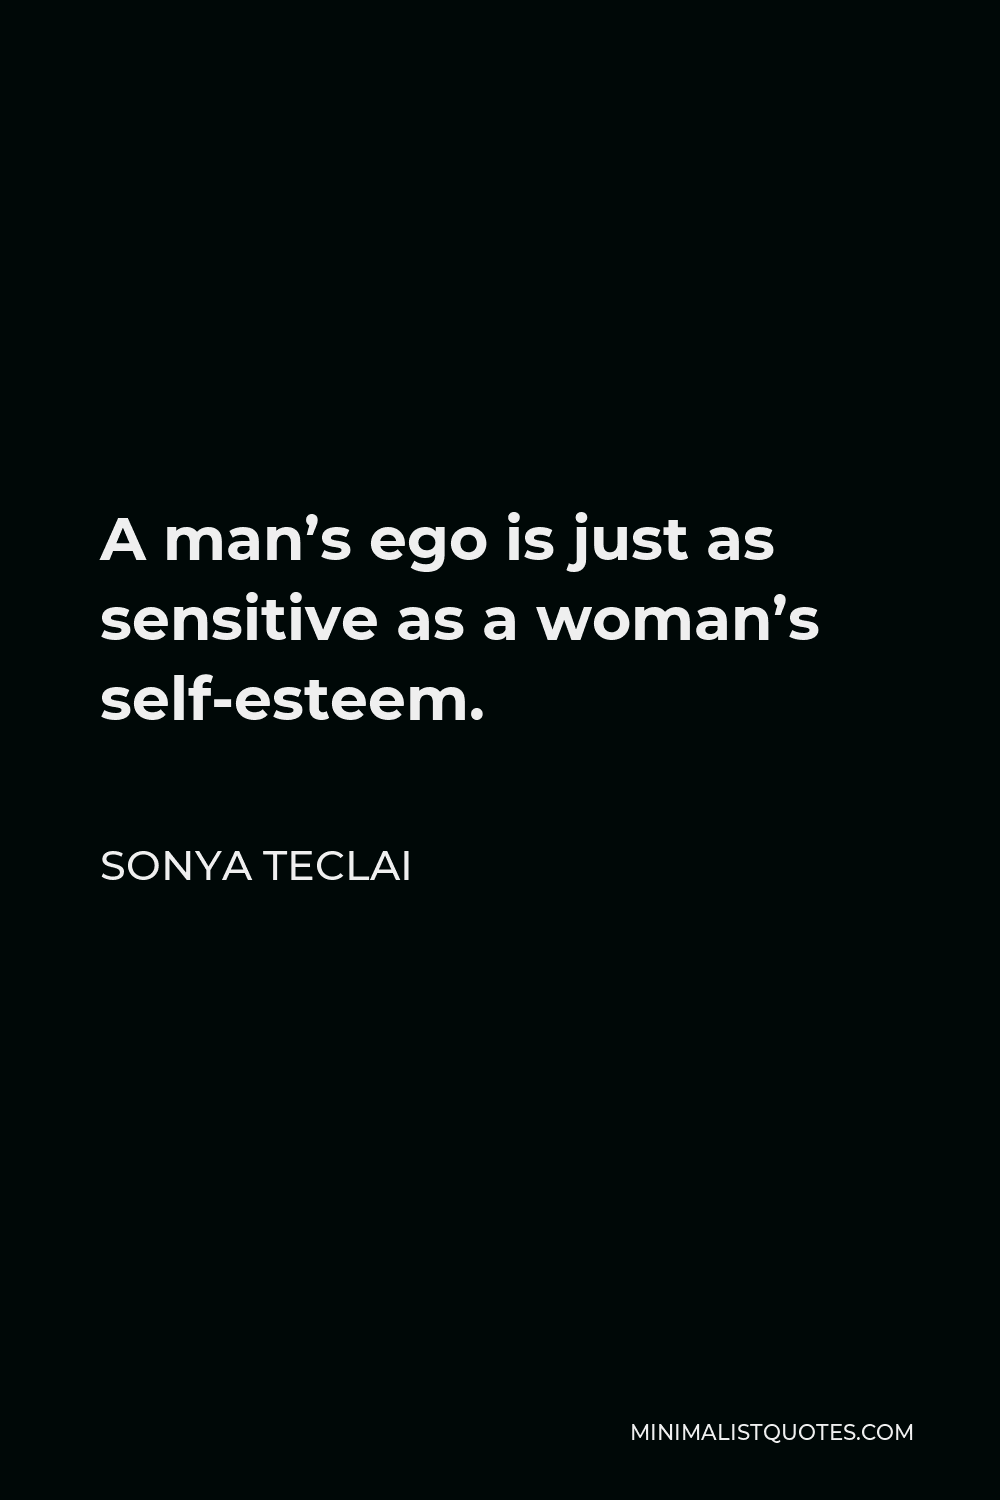 Sonya Teclai Quote - A man’s ego is just as sensitive as a woman’s self-esteem.